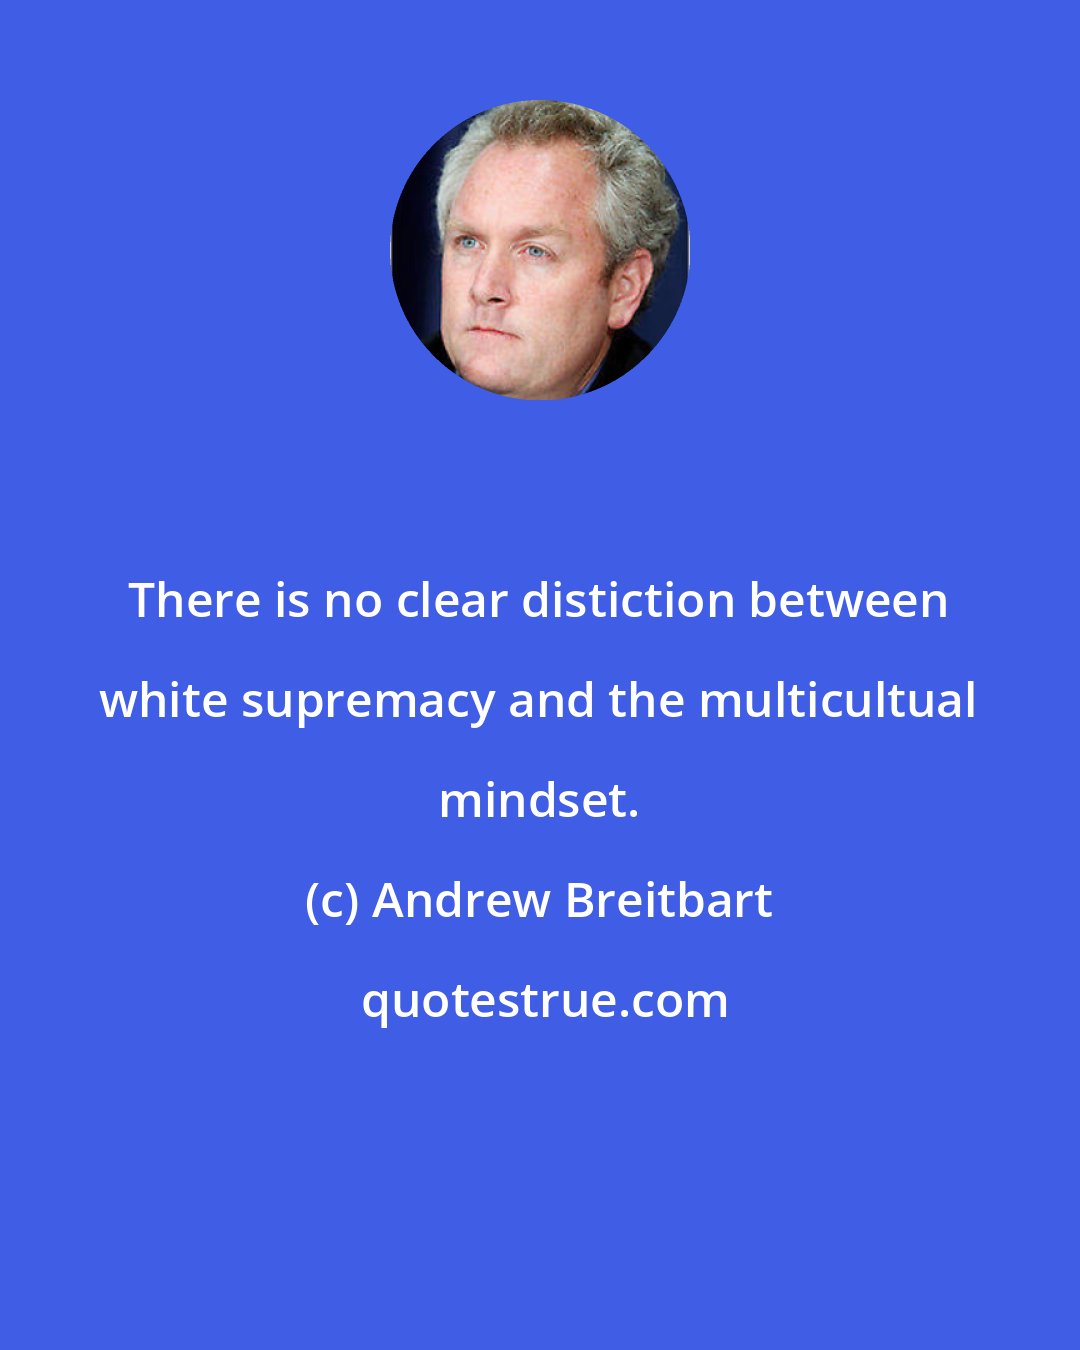 Andrew Breitbart: There is no clear distiction between white supremacy and the multicultual mindset.